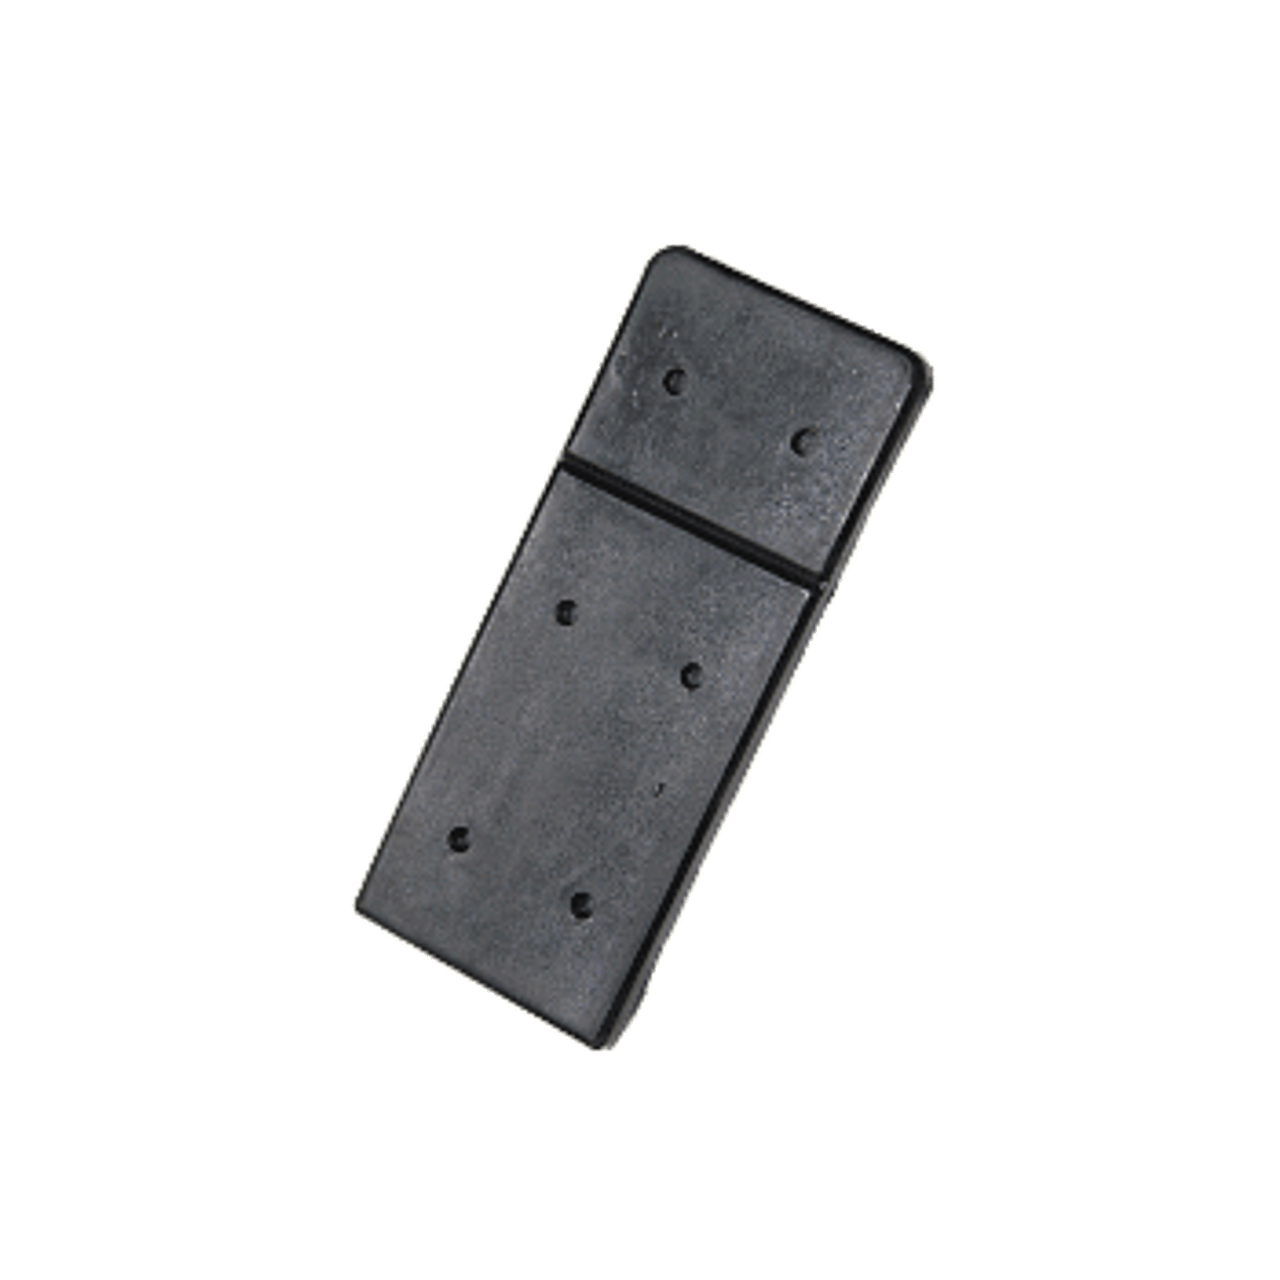 2.03.0014 ACCELERATOR PEDAL PAD

On your purchase from Evolution Electric Vehicle, Evolution is your source for most extensive selection of golf cart parts and accessories in the industry.

Apply to(Vehicle Type)
CLASSIC 2/4
CARRIER 6/8
FORESTER 4/6
TURFMAN 200/800/1000